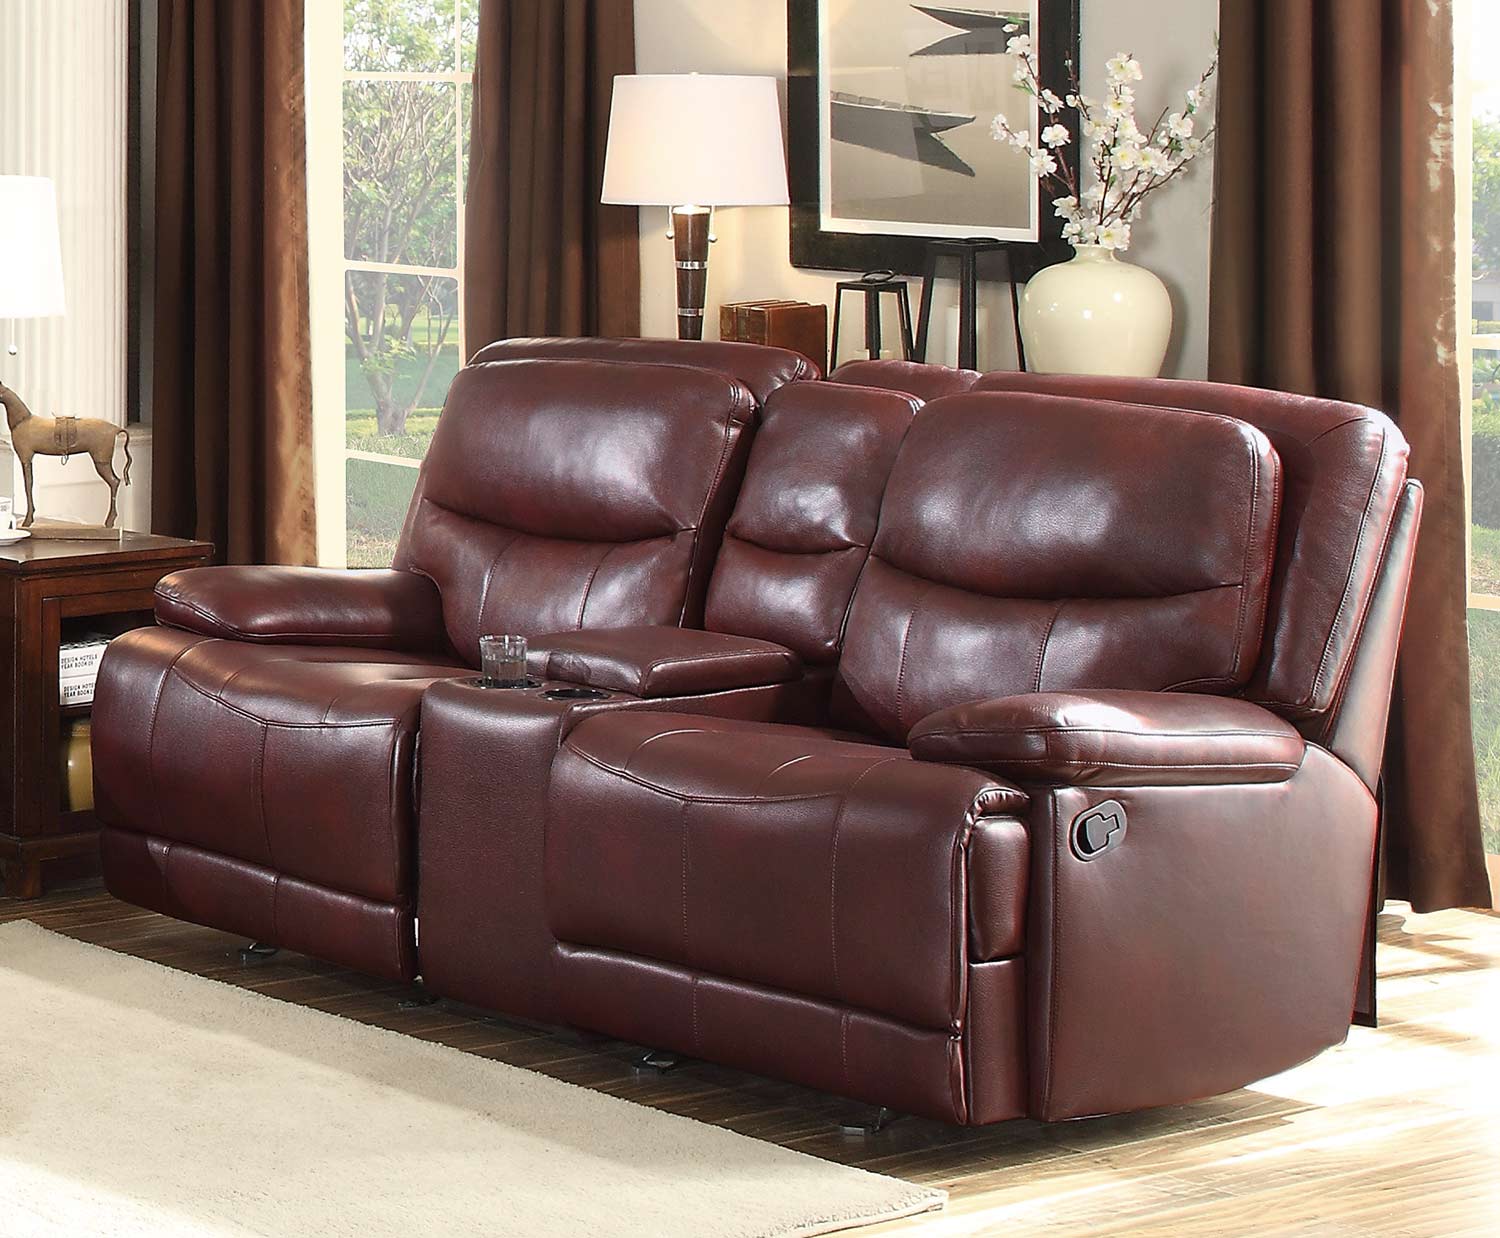 Homelegance Risco Double Glider Reclining Love Seat with Center Console - Burgundy